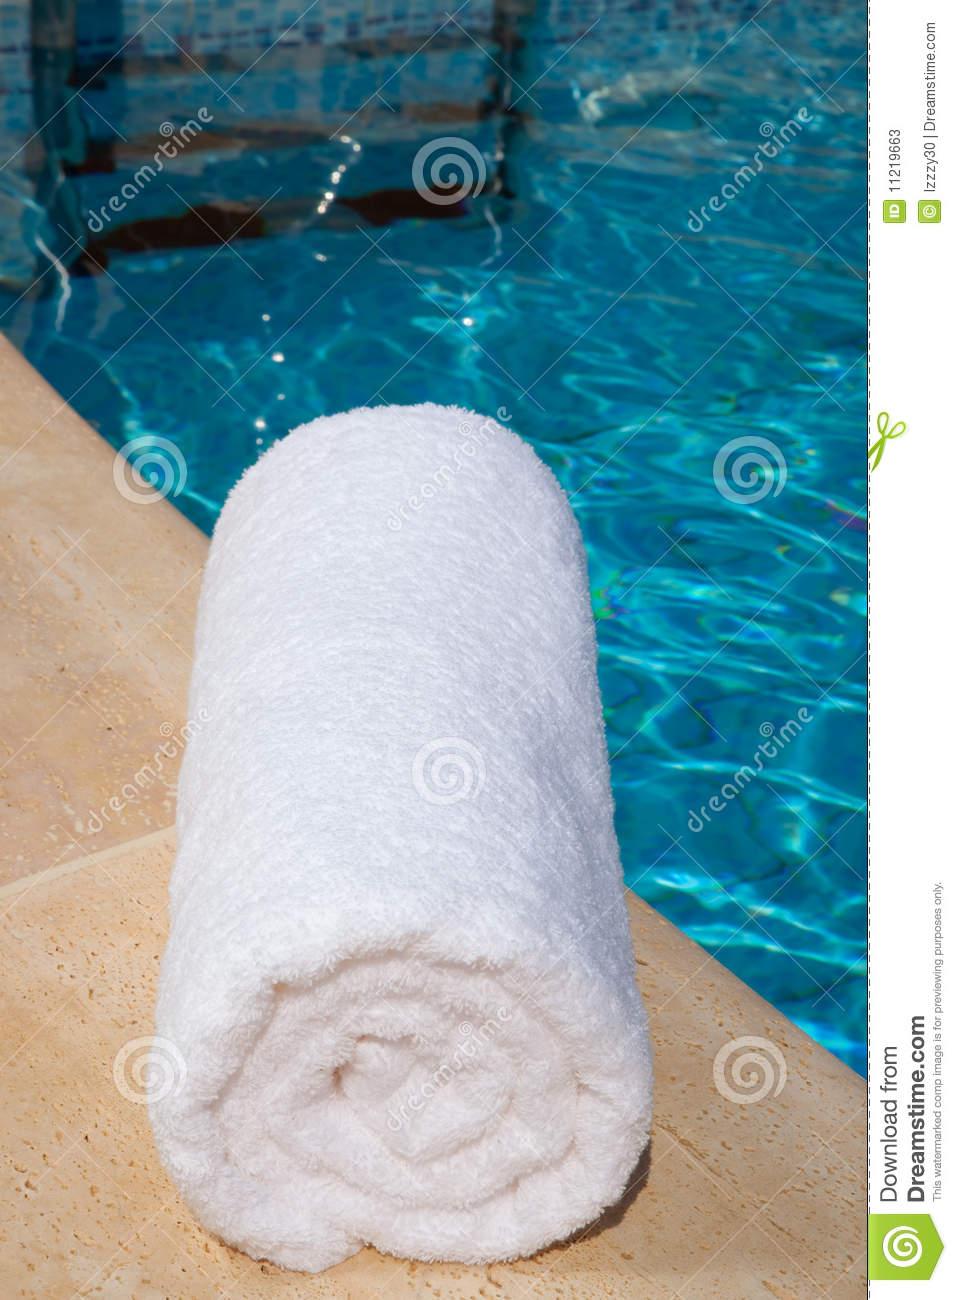 One Rolled Up White Towel By Blue Pool Stock Photos   Image  11219663